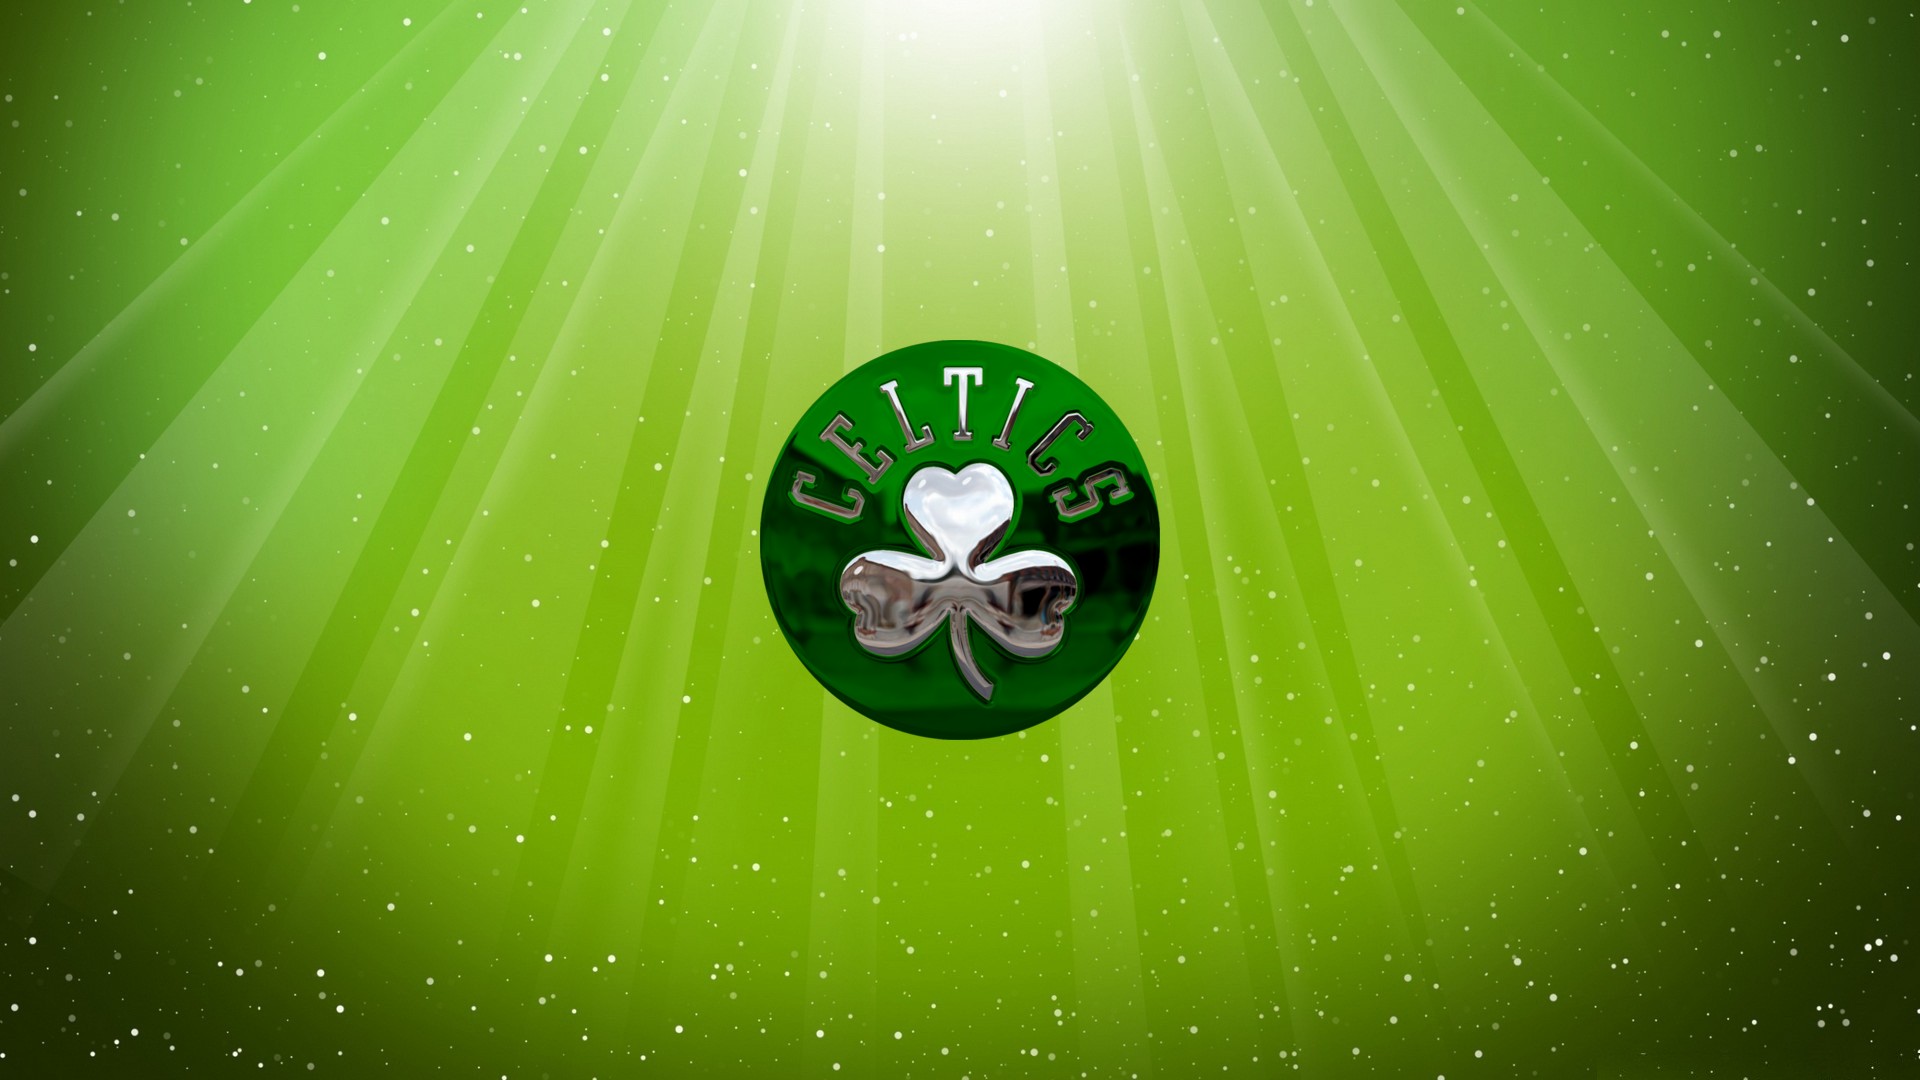 HD Boston Celtics Backgrounds with image dimensions 1920x1080 pixel. You can make this wallpaper for your Desktop Computer Backgrounds, Windows or Mac Screensavers, iPhone Lock screen, Tablet or Android and another Mobile Phone device